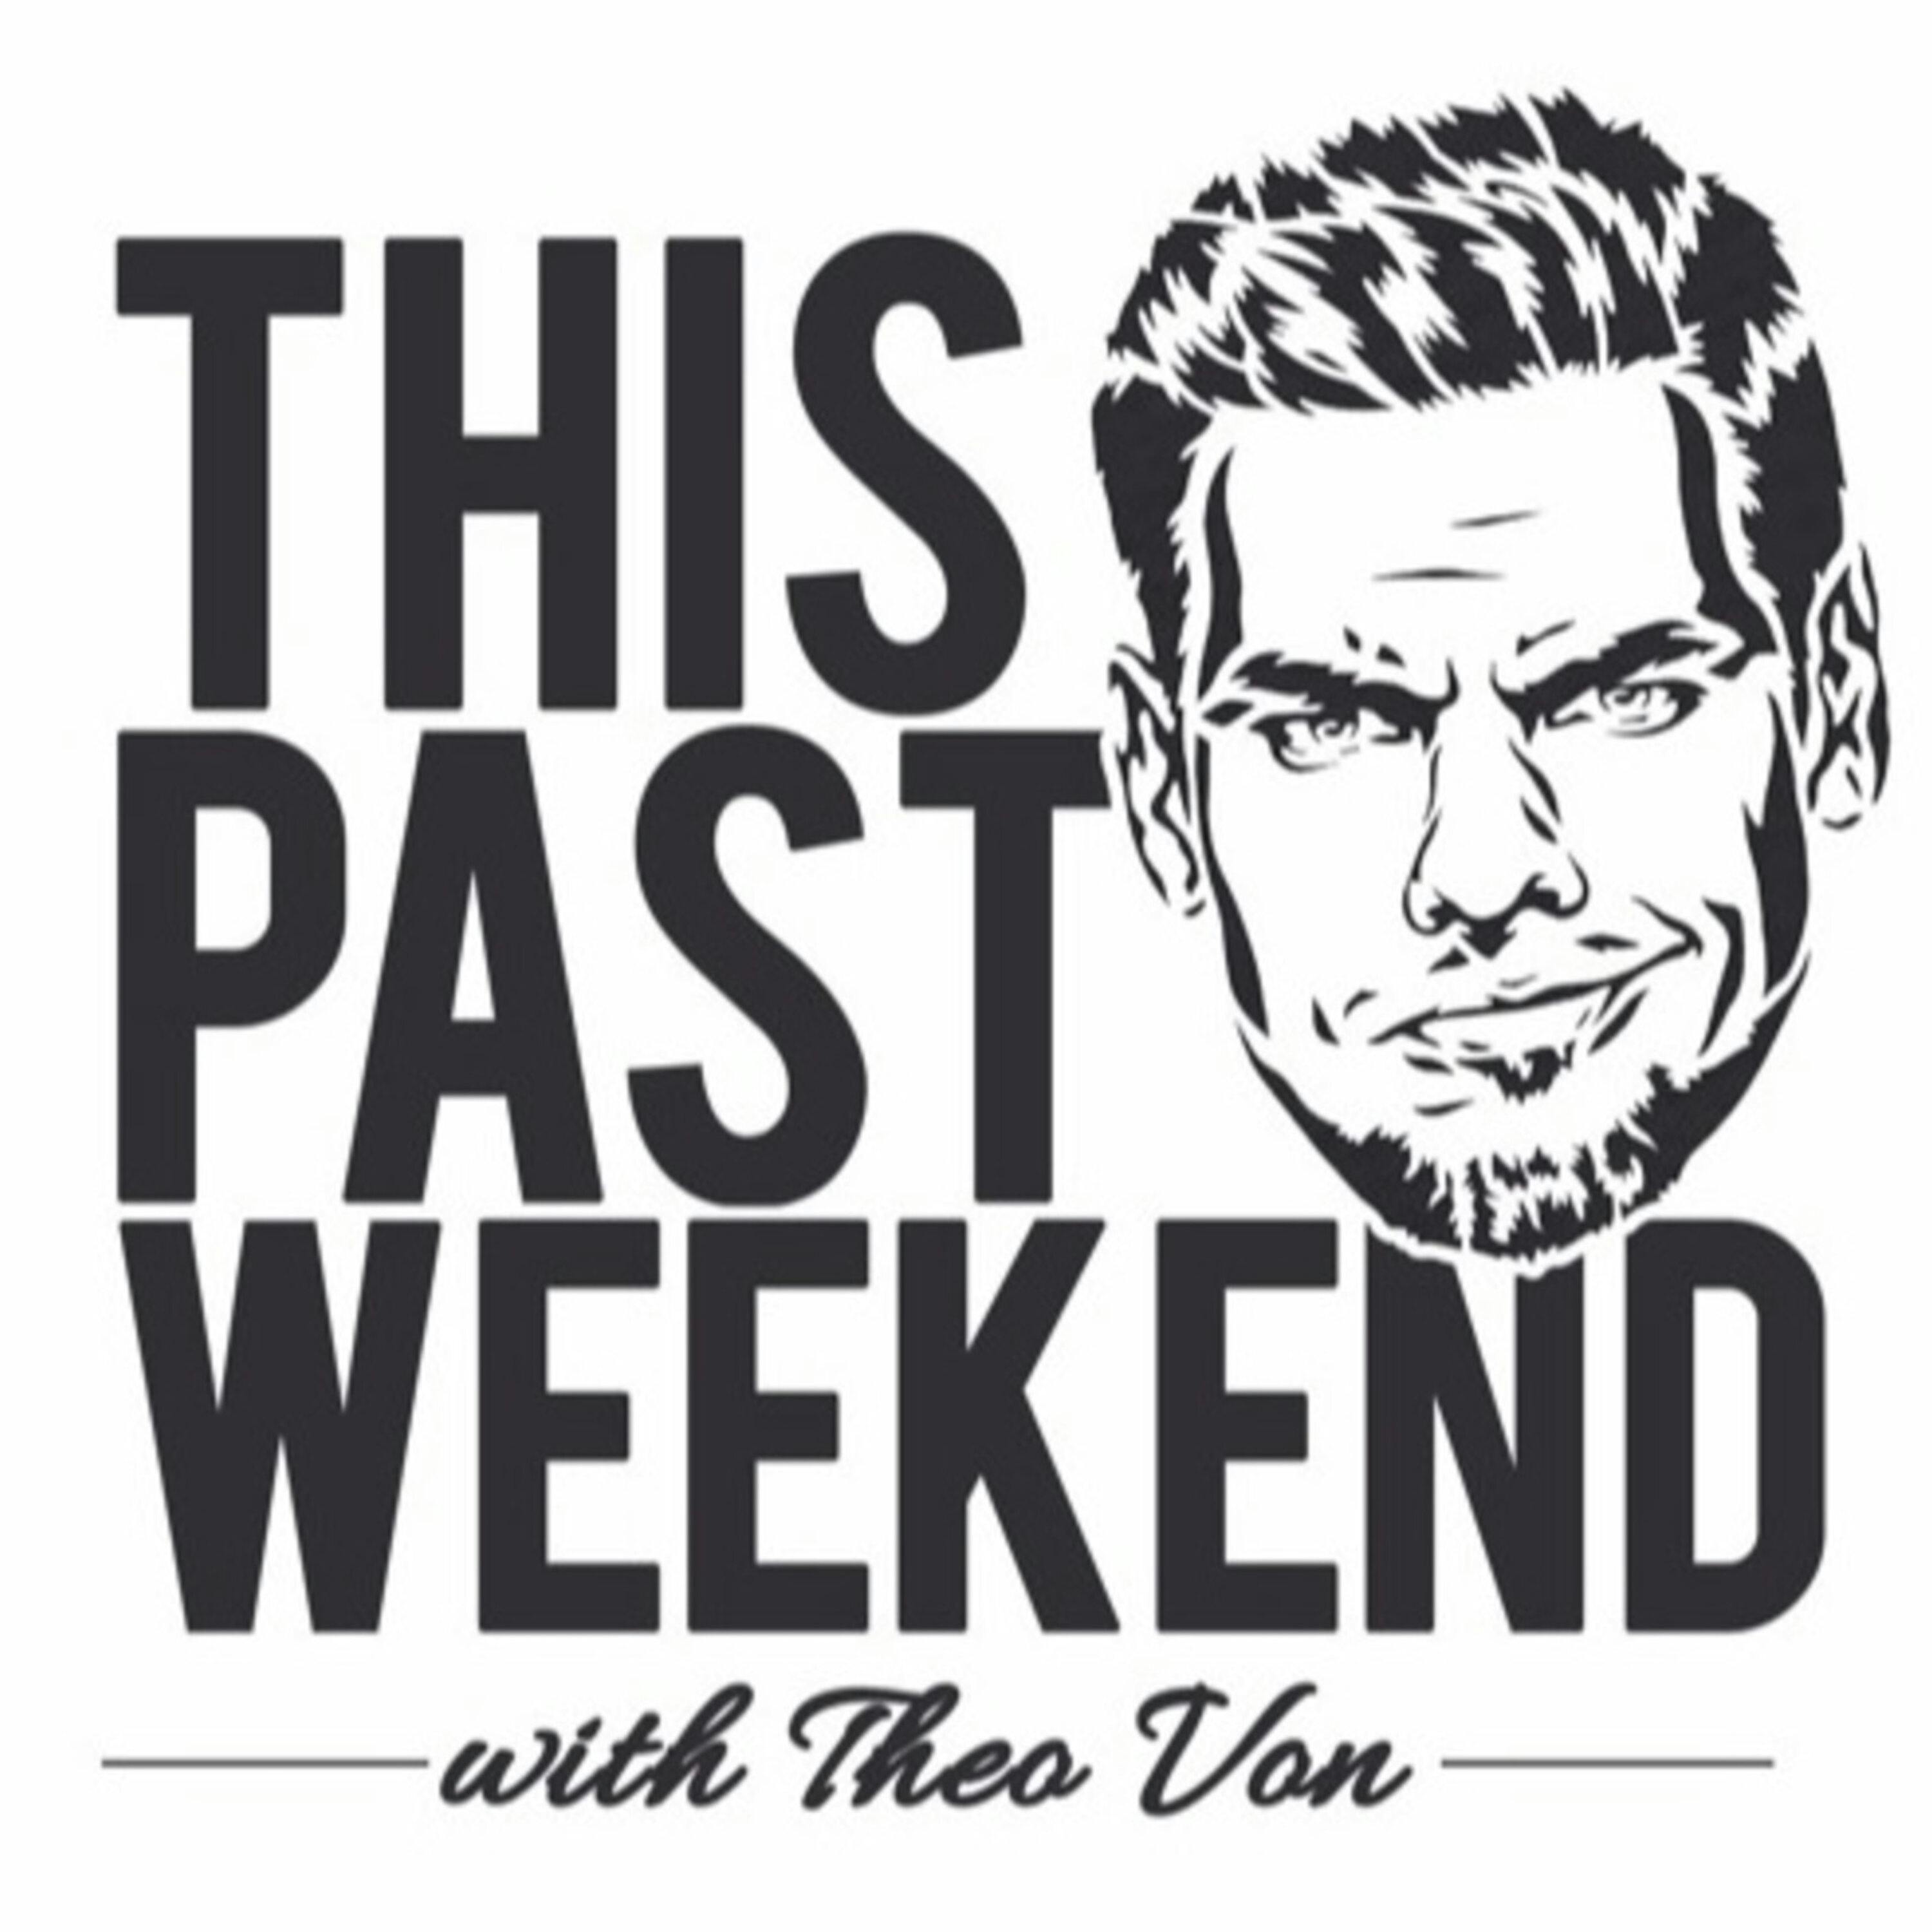 11-6-17 | This Past Weekend #50 by Theo Von